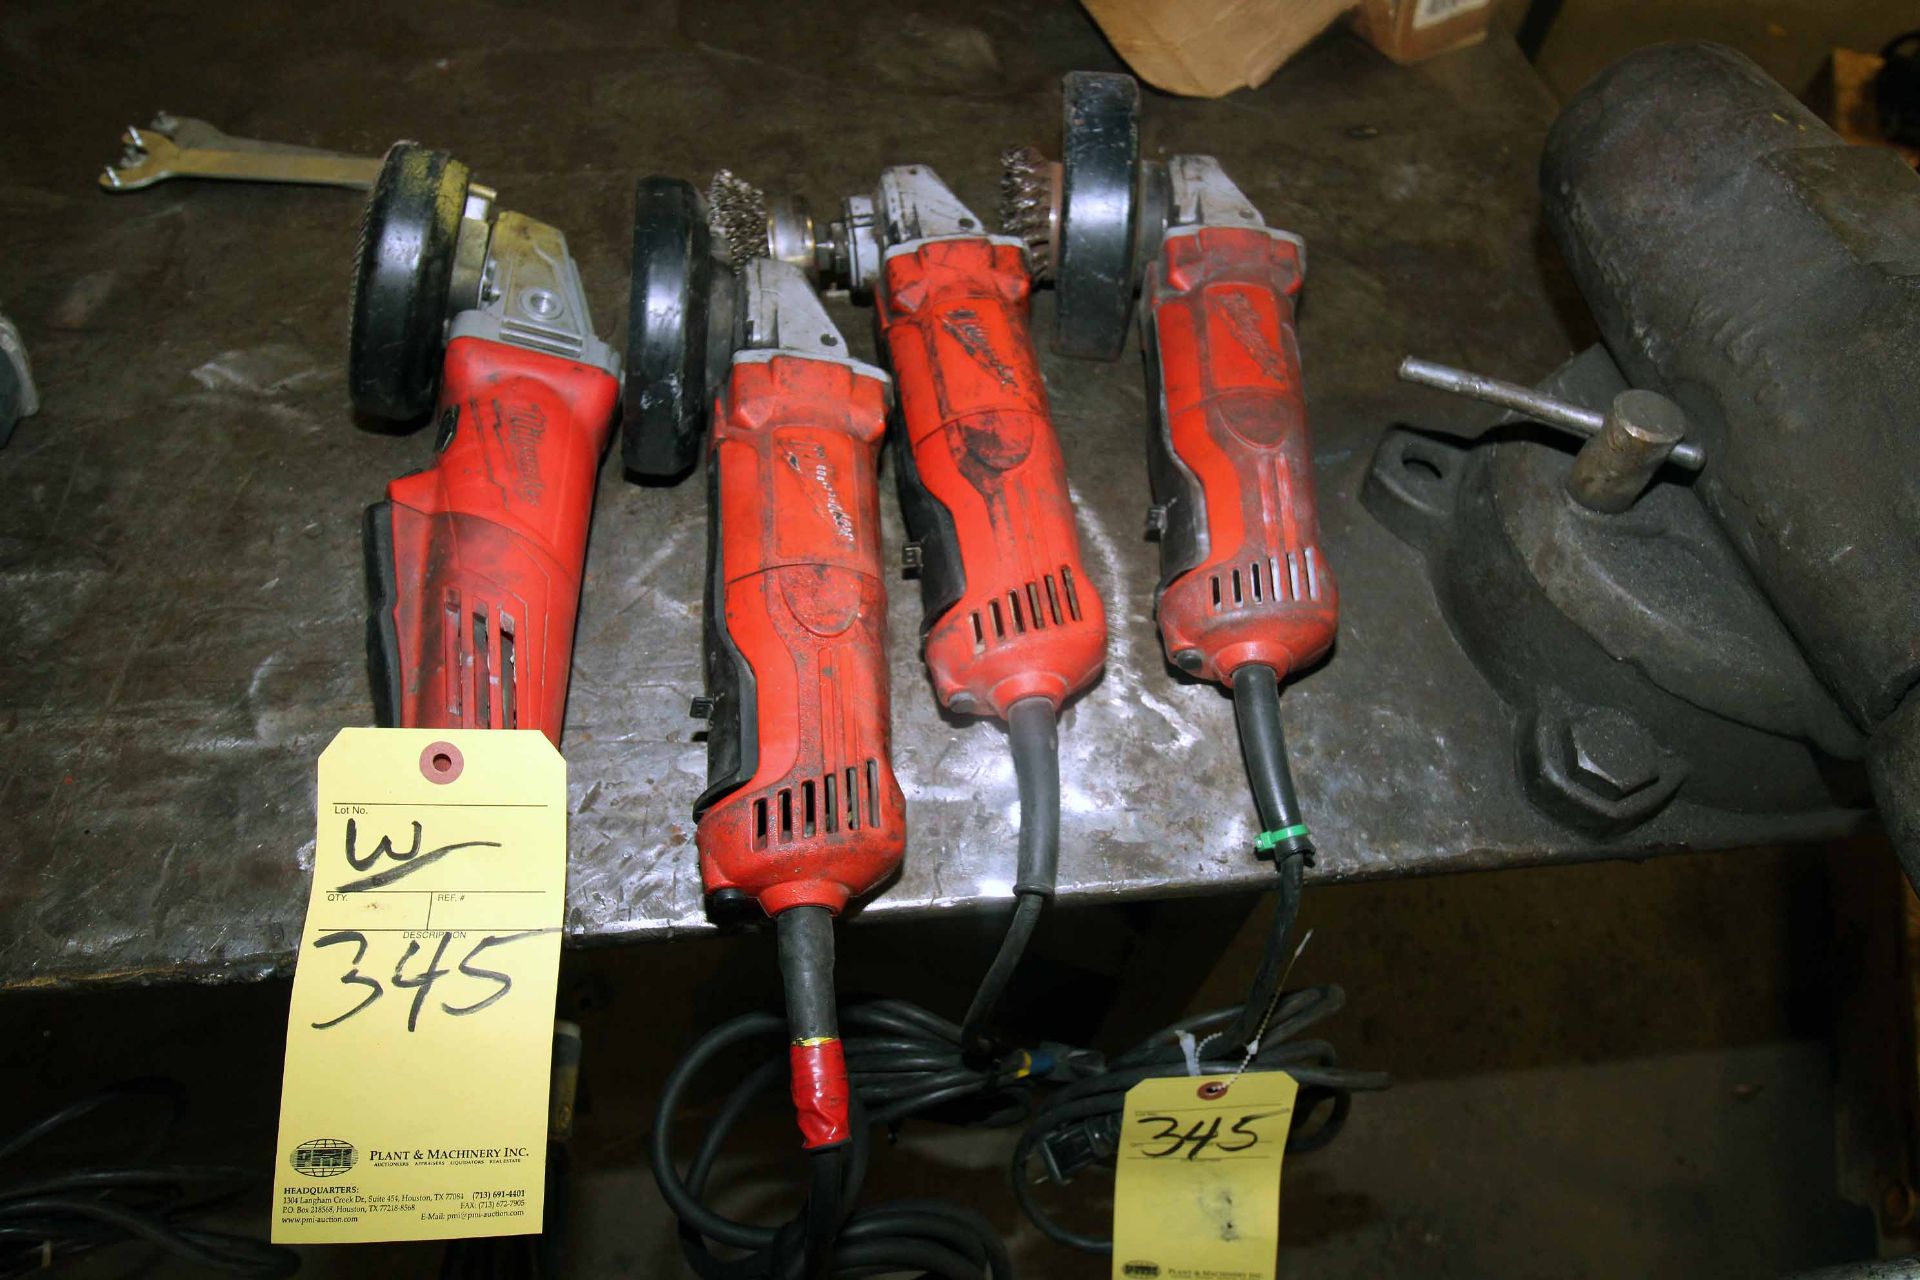 LOT OF GRINDERS (4), MILWAUKEE, corded, 4-1.2"